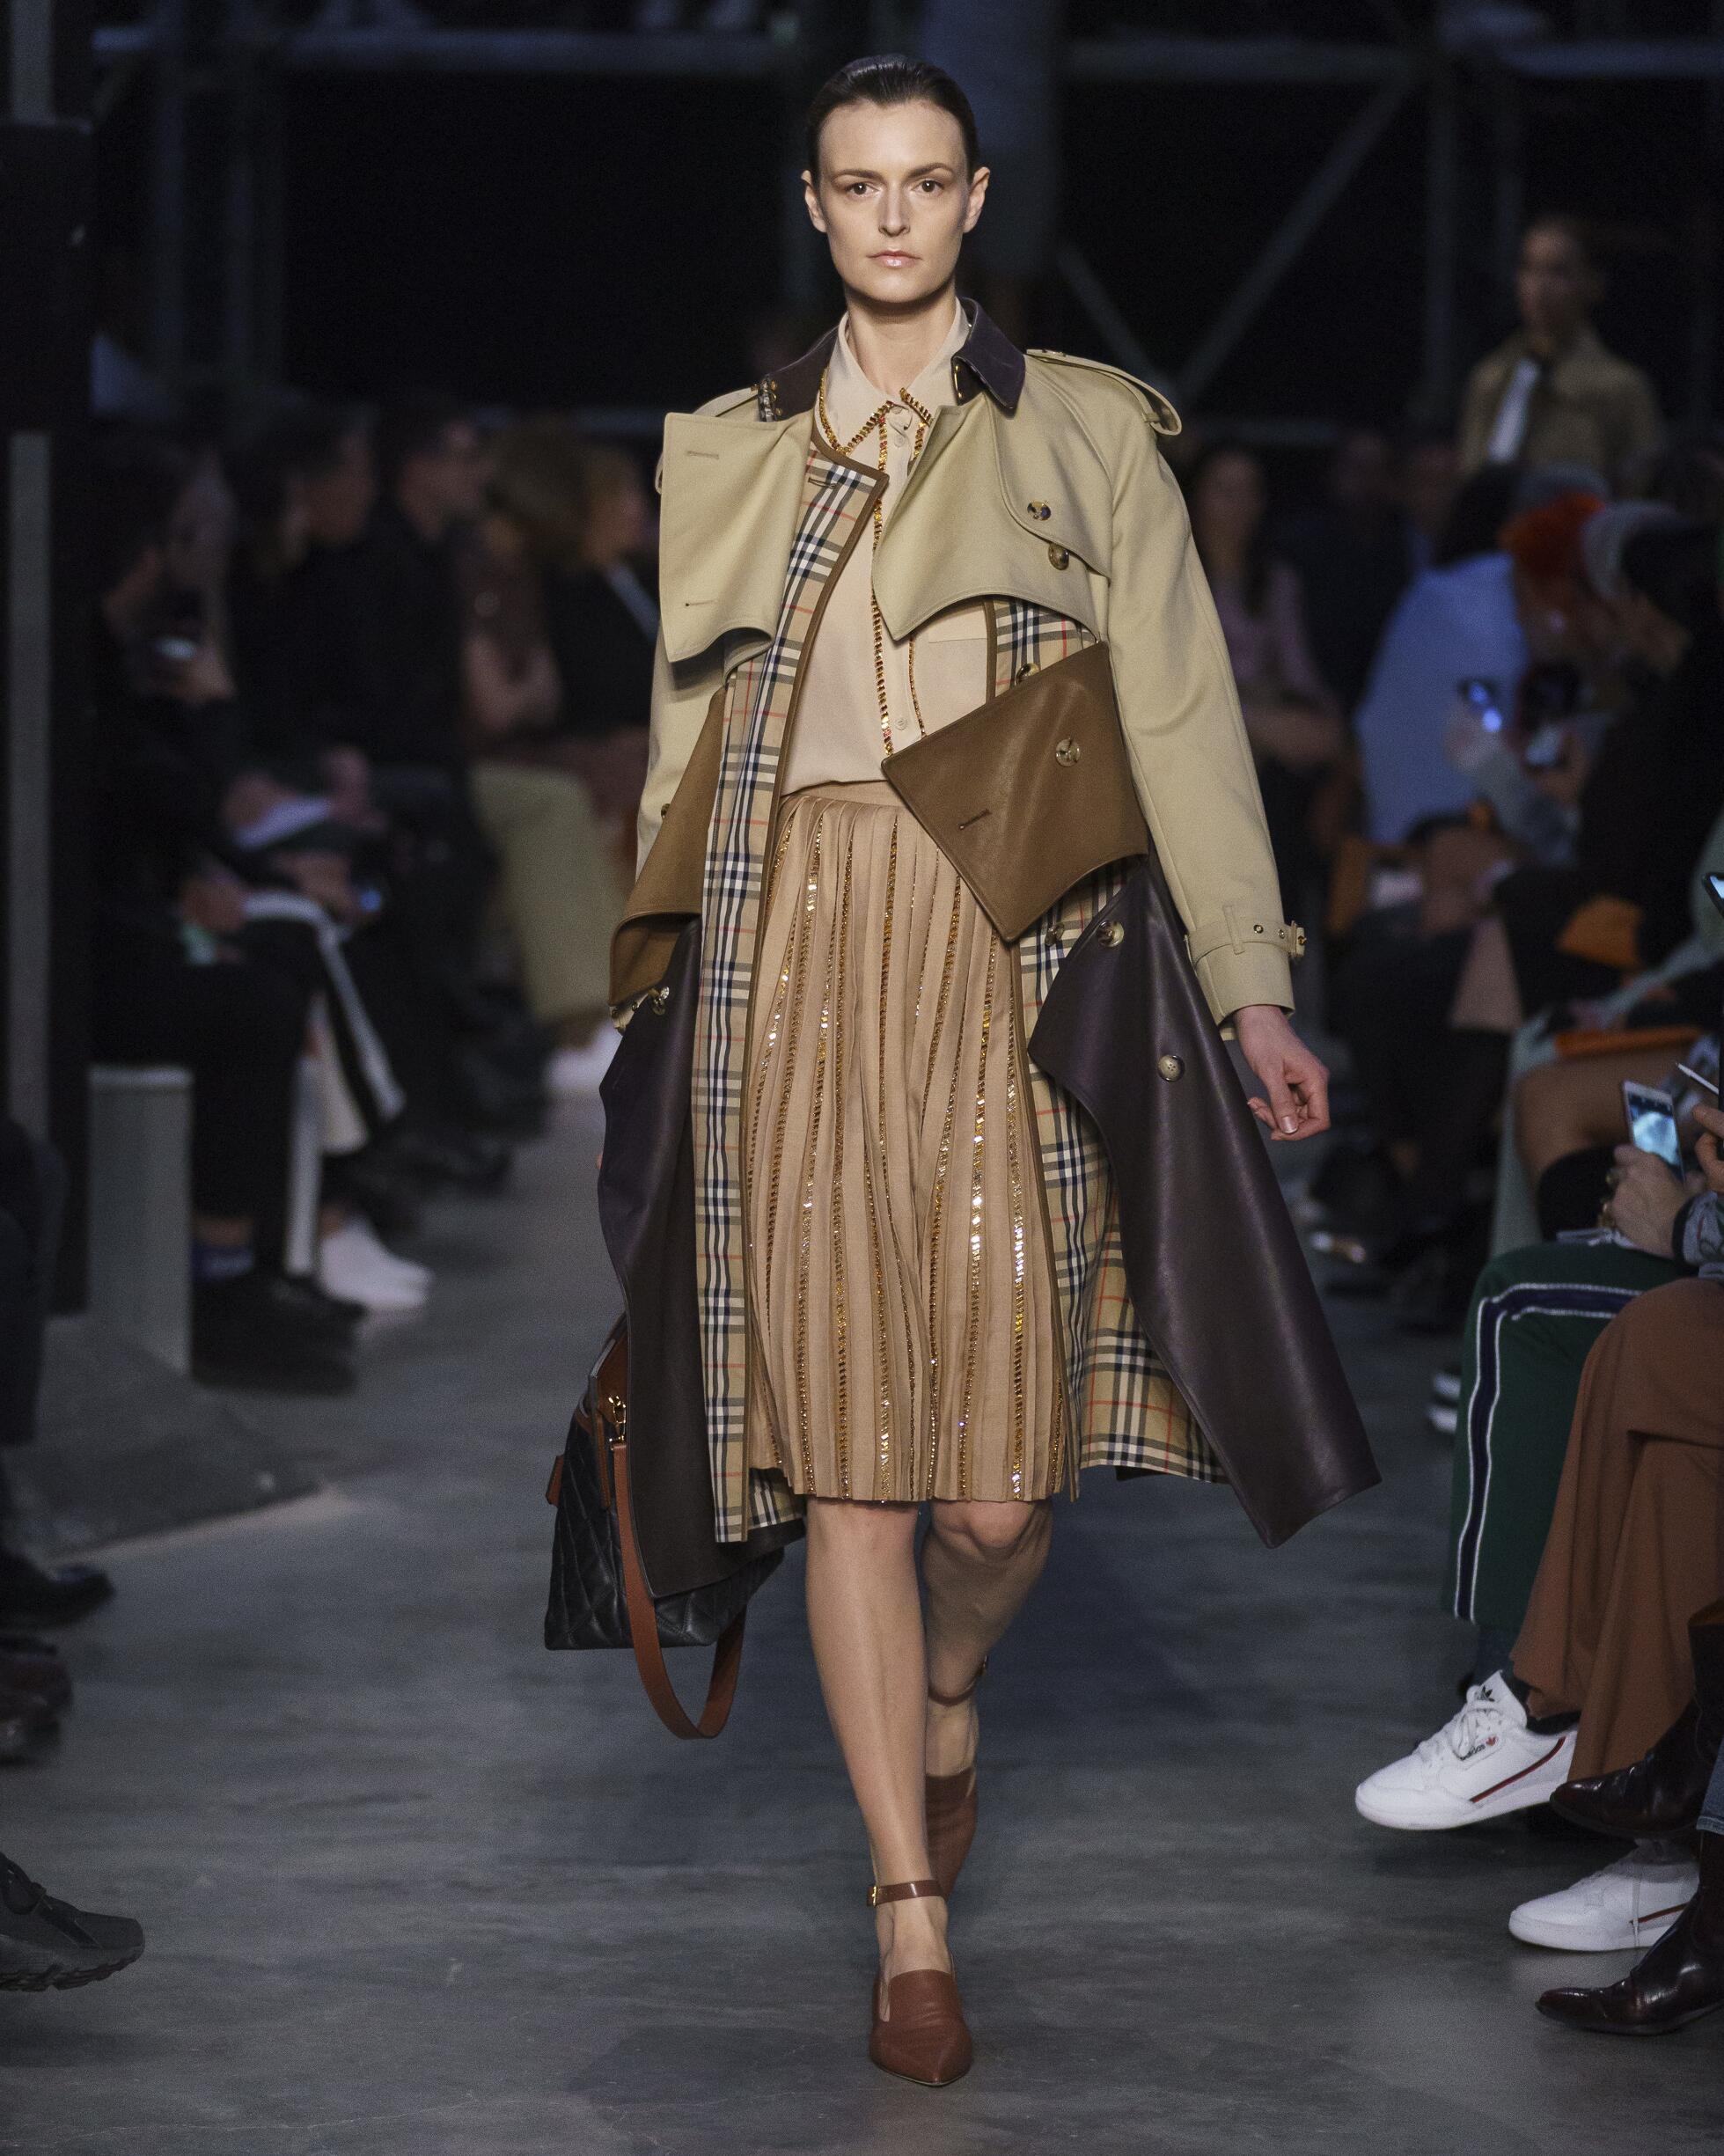 dug Vores firma sukker BURBERRY FALL WINTER 2019 COLLECTION | The Skinny Beep